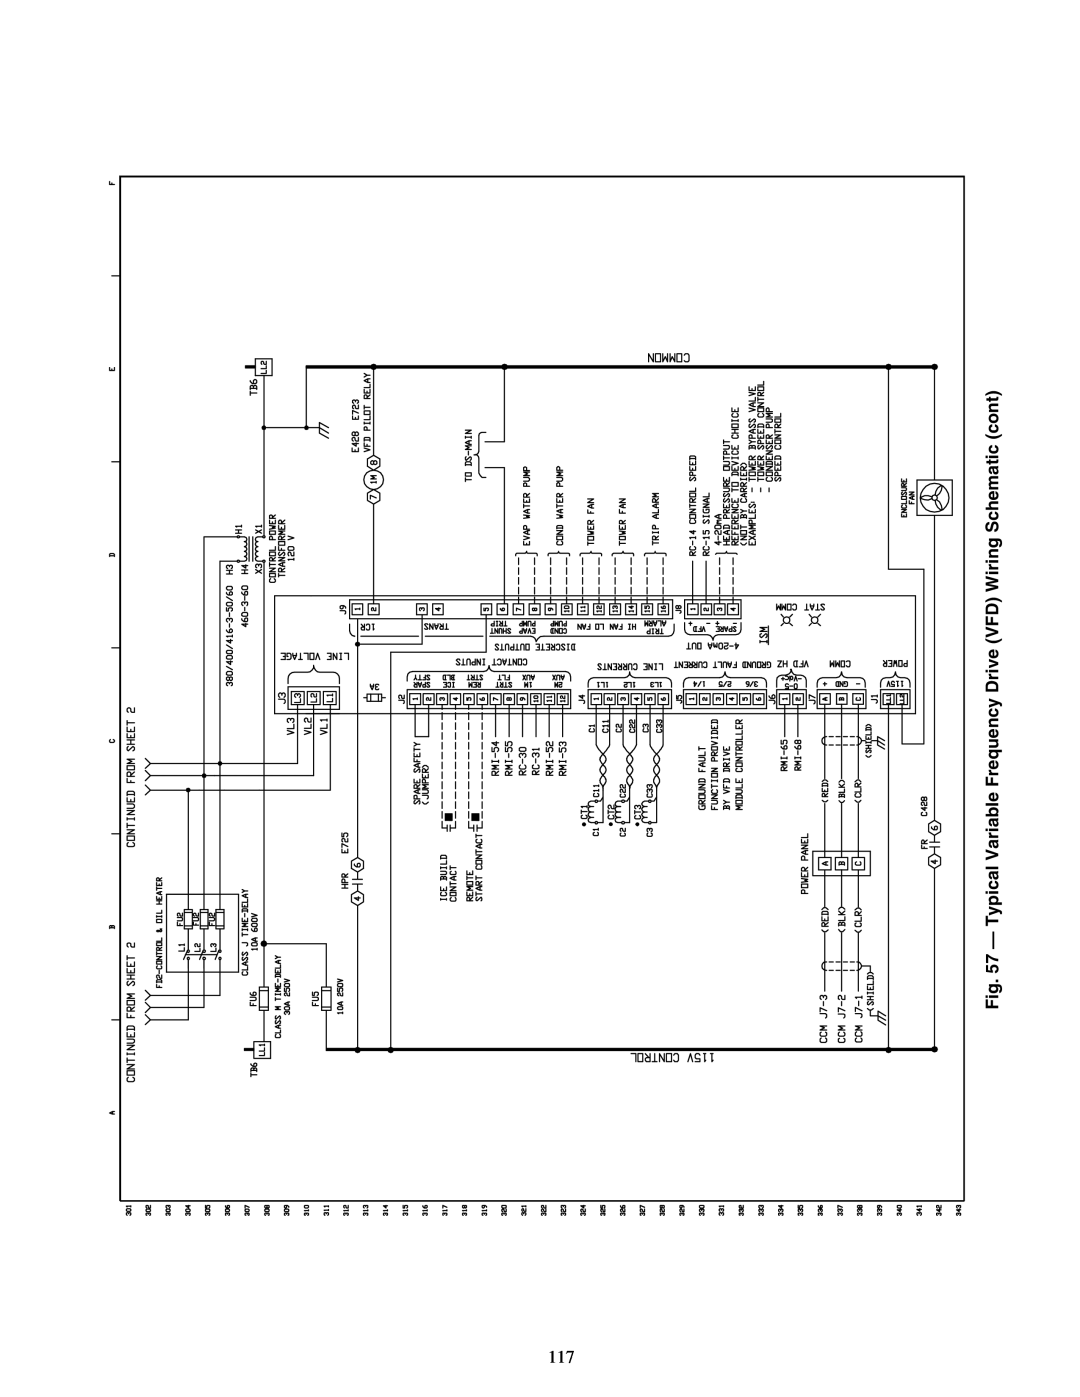 Carrier XRV, 19XR specifications Typical Variable Frequency Drive VFD Wiring Schematic cont 